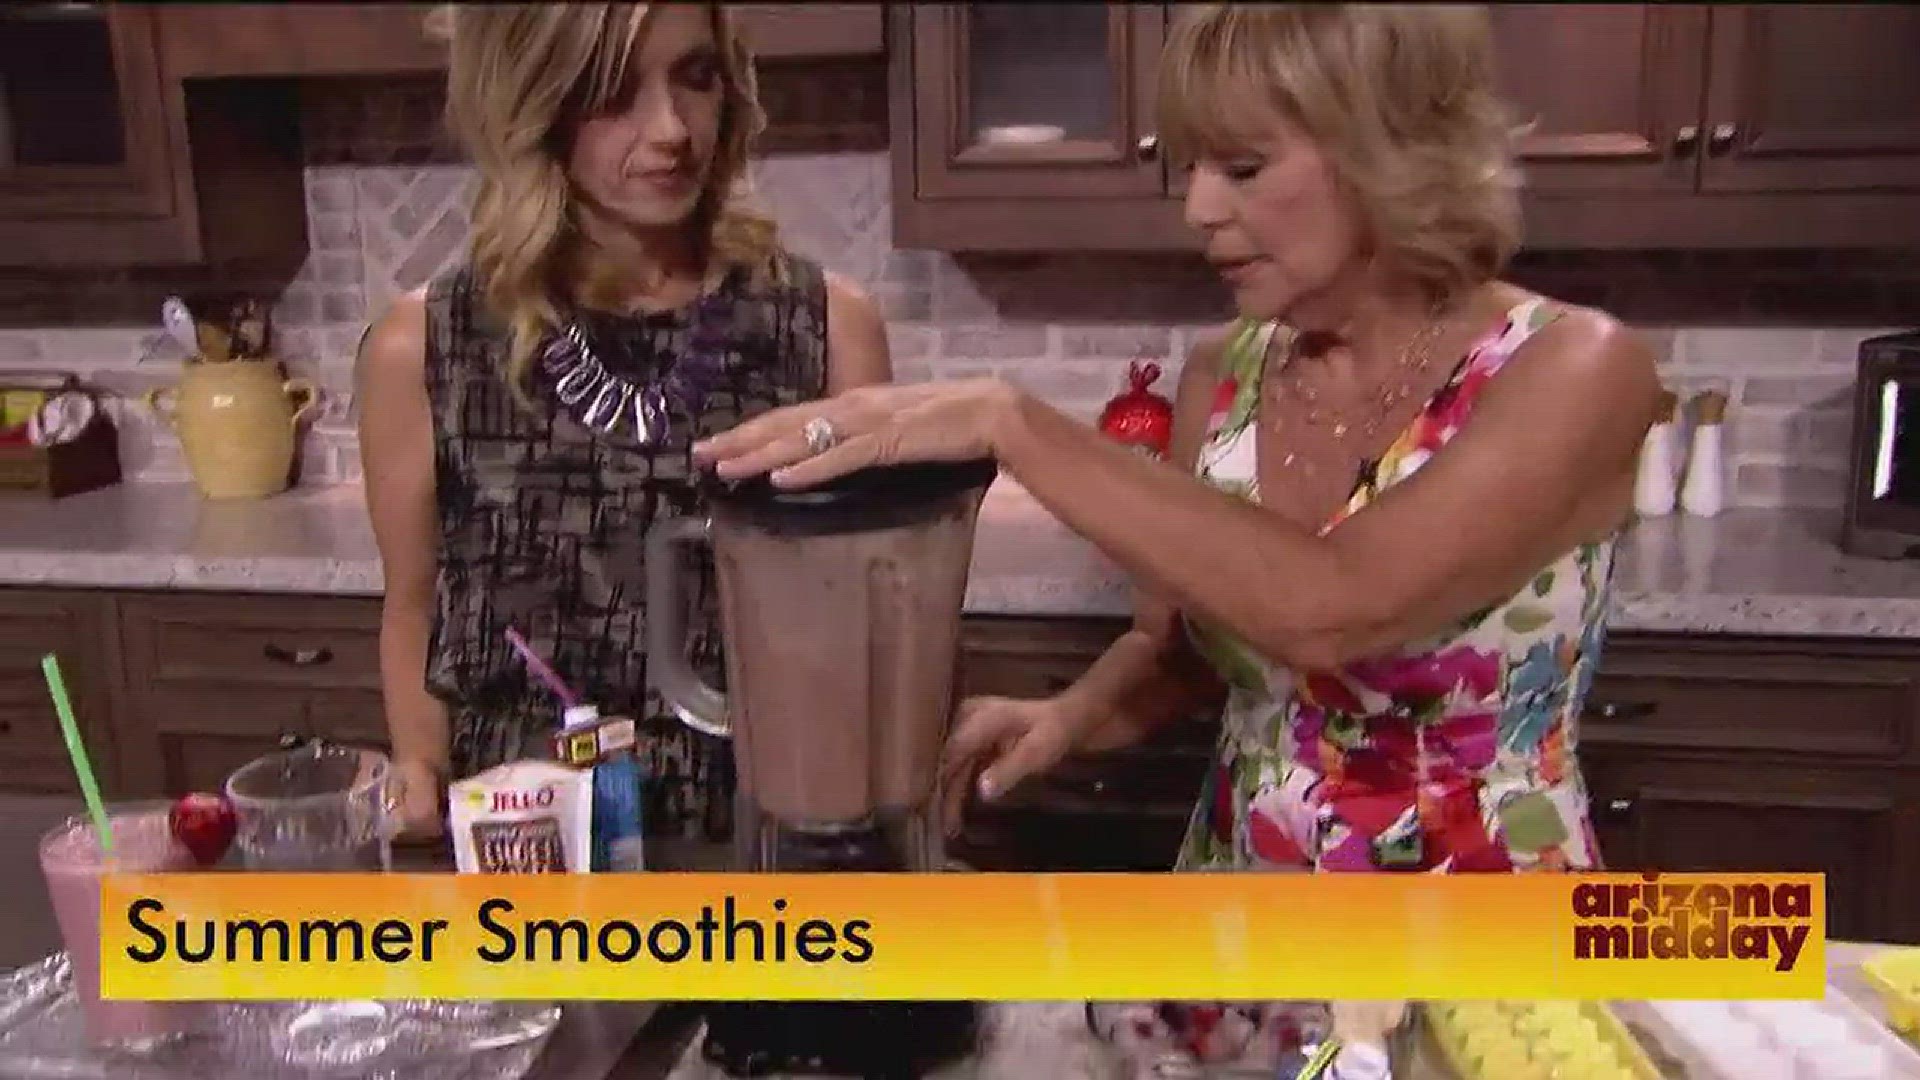 Almond Milk and avocados? These are some of the surprising ingredients Jan is using in her healthy, and seriously tasty, summer smoothies!